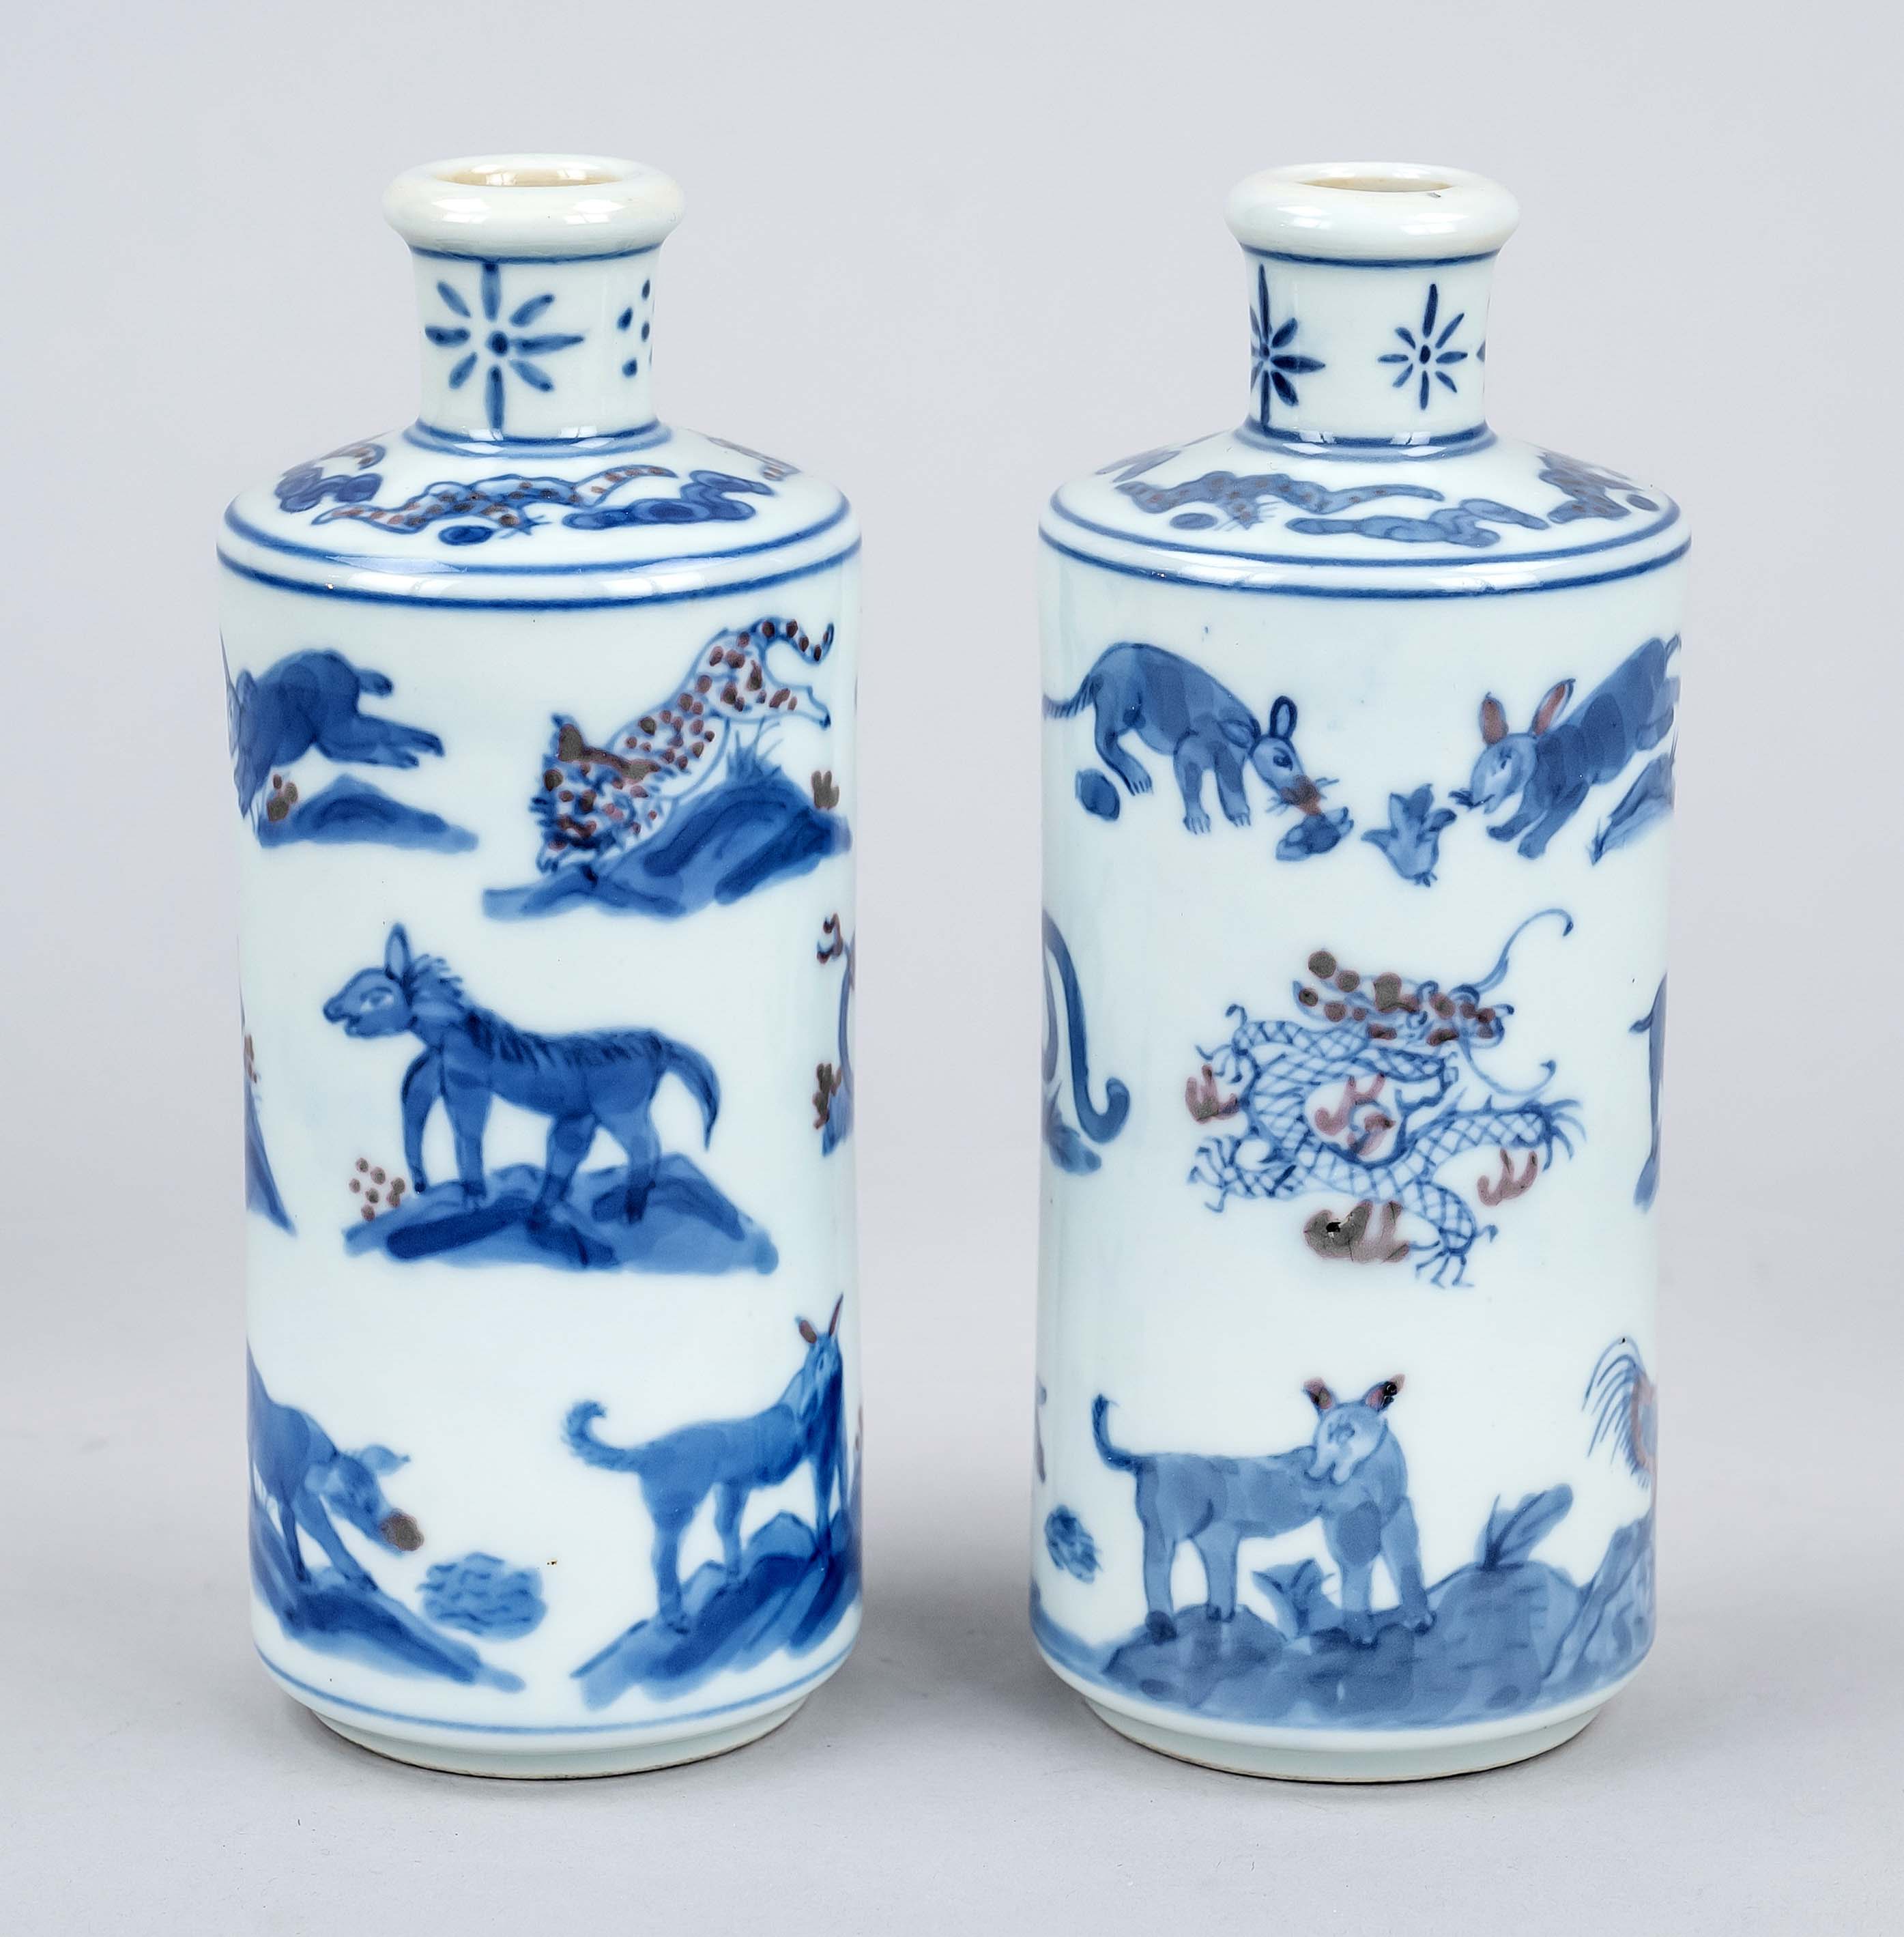 Pair of blue and white bottle vases ''Zodiac Animals'', China, probably early 20th c., porcelain